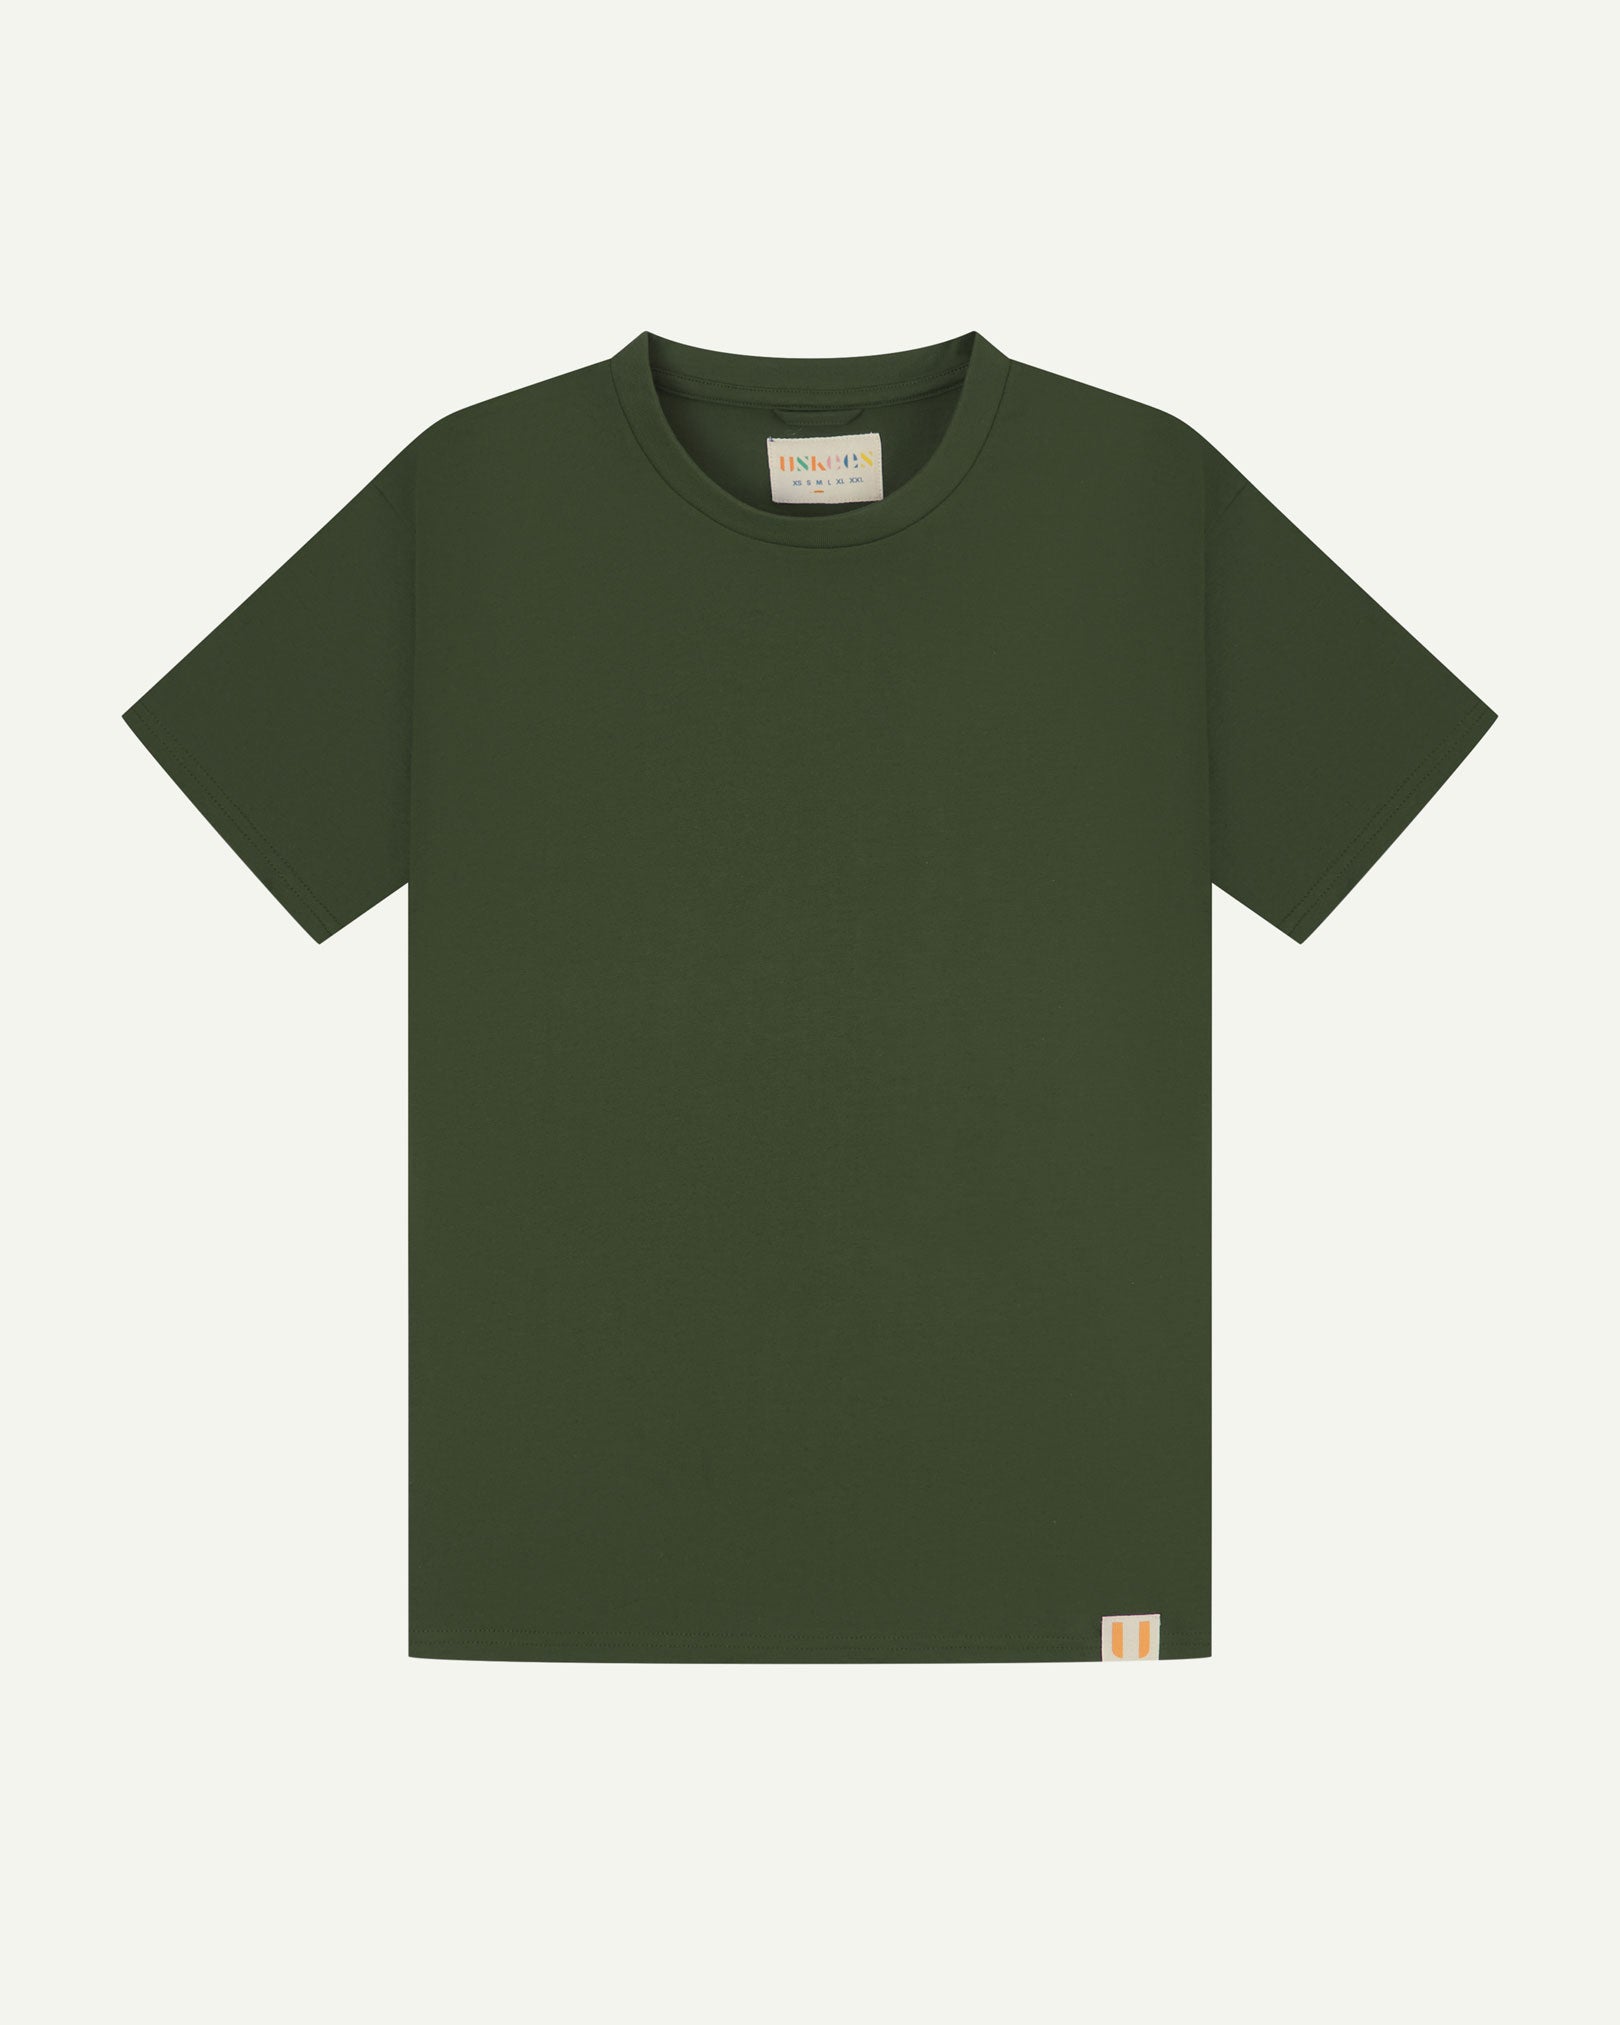 Full flat view of coriander green organic cotton Uskees T-shirt for men.